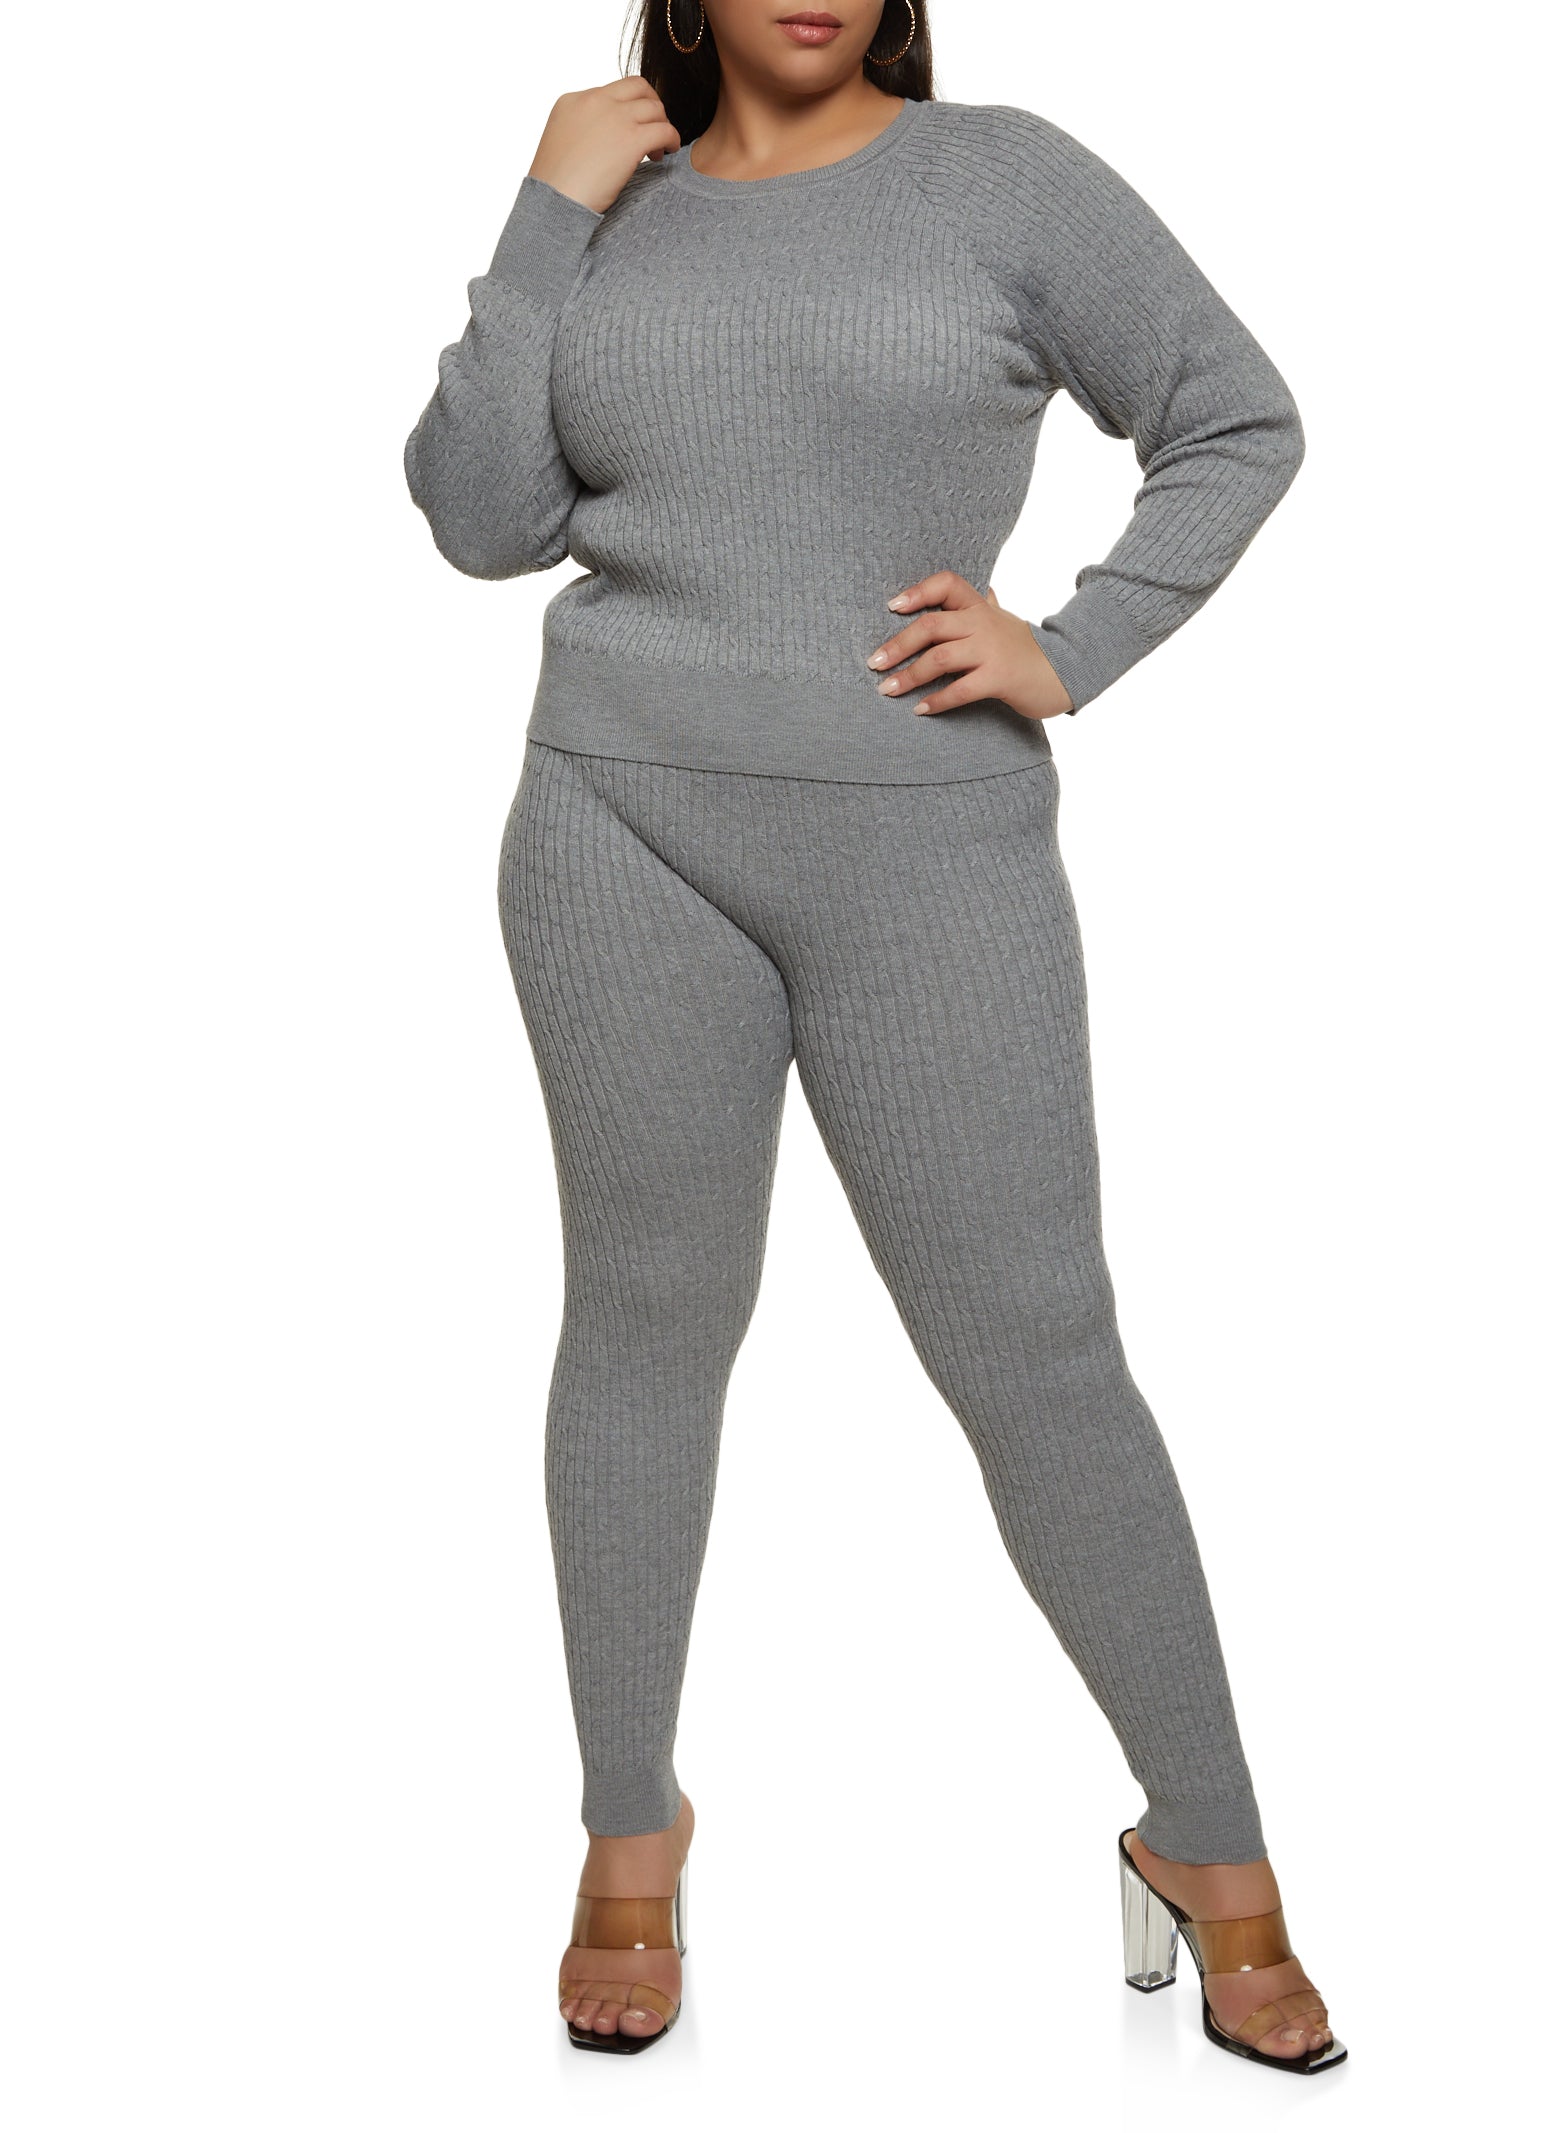 Cable Knit Crew Neck Sweater and Leggings Set - Heather